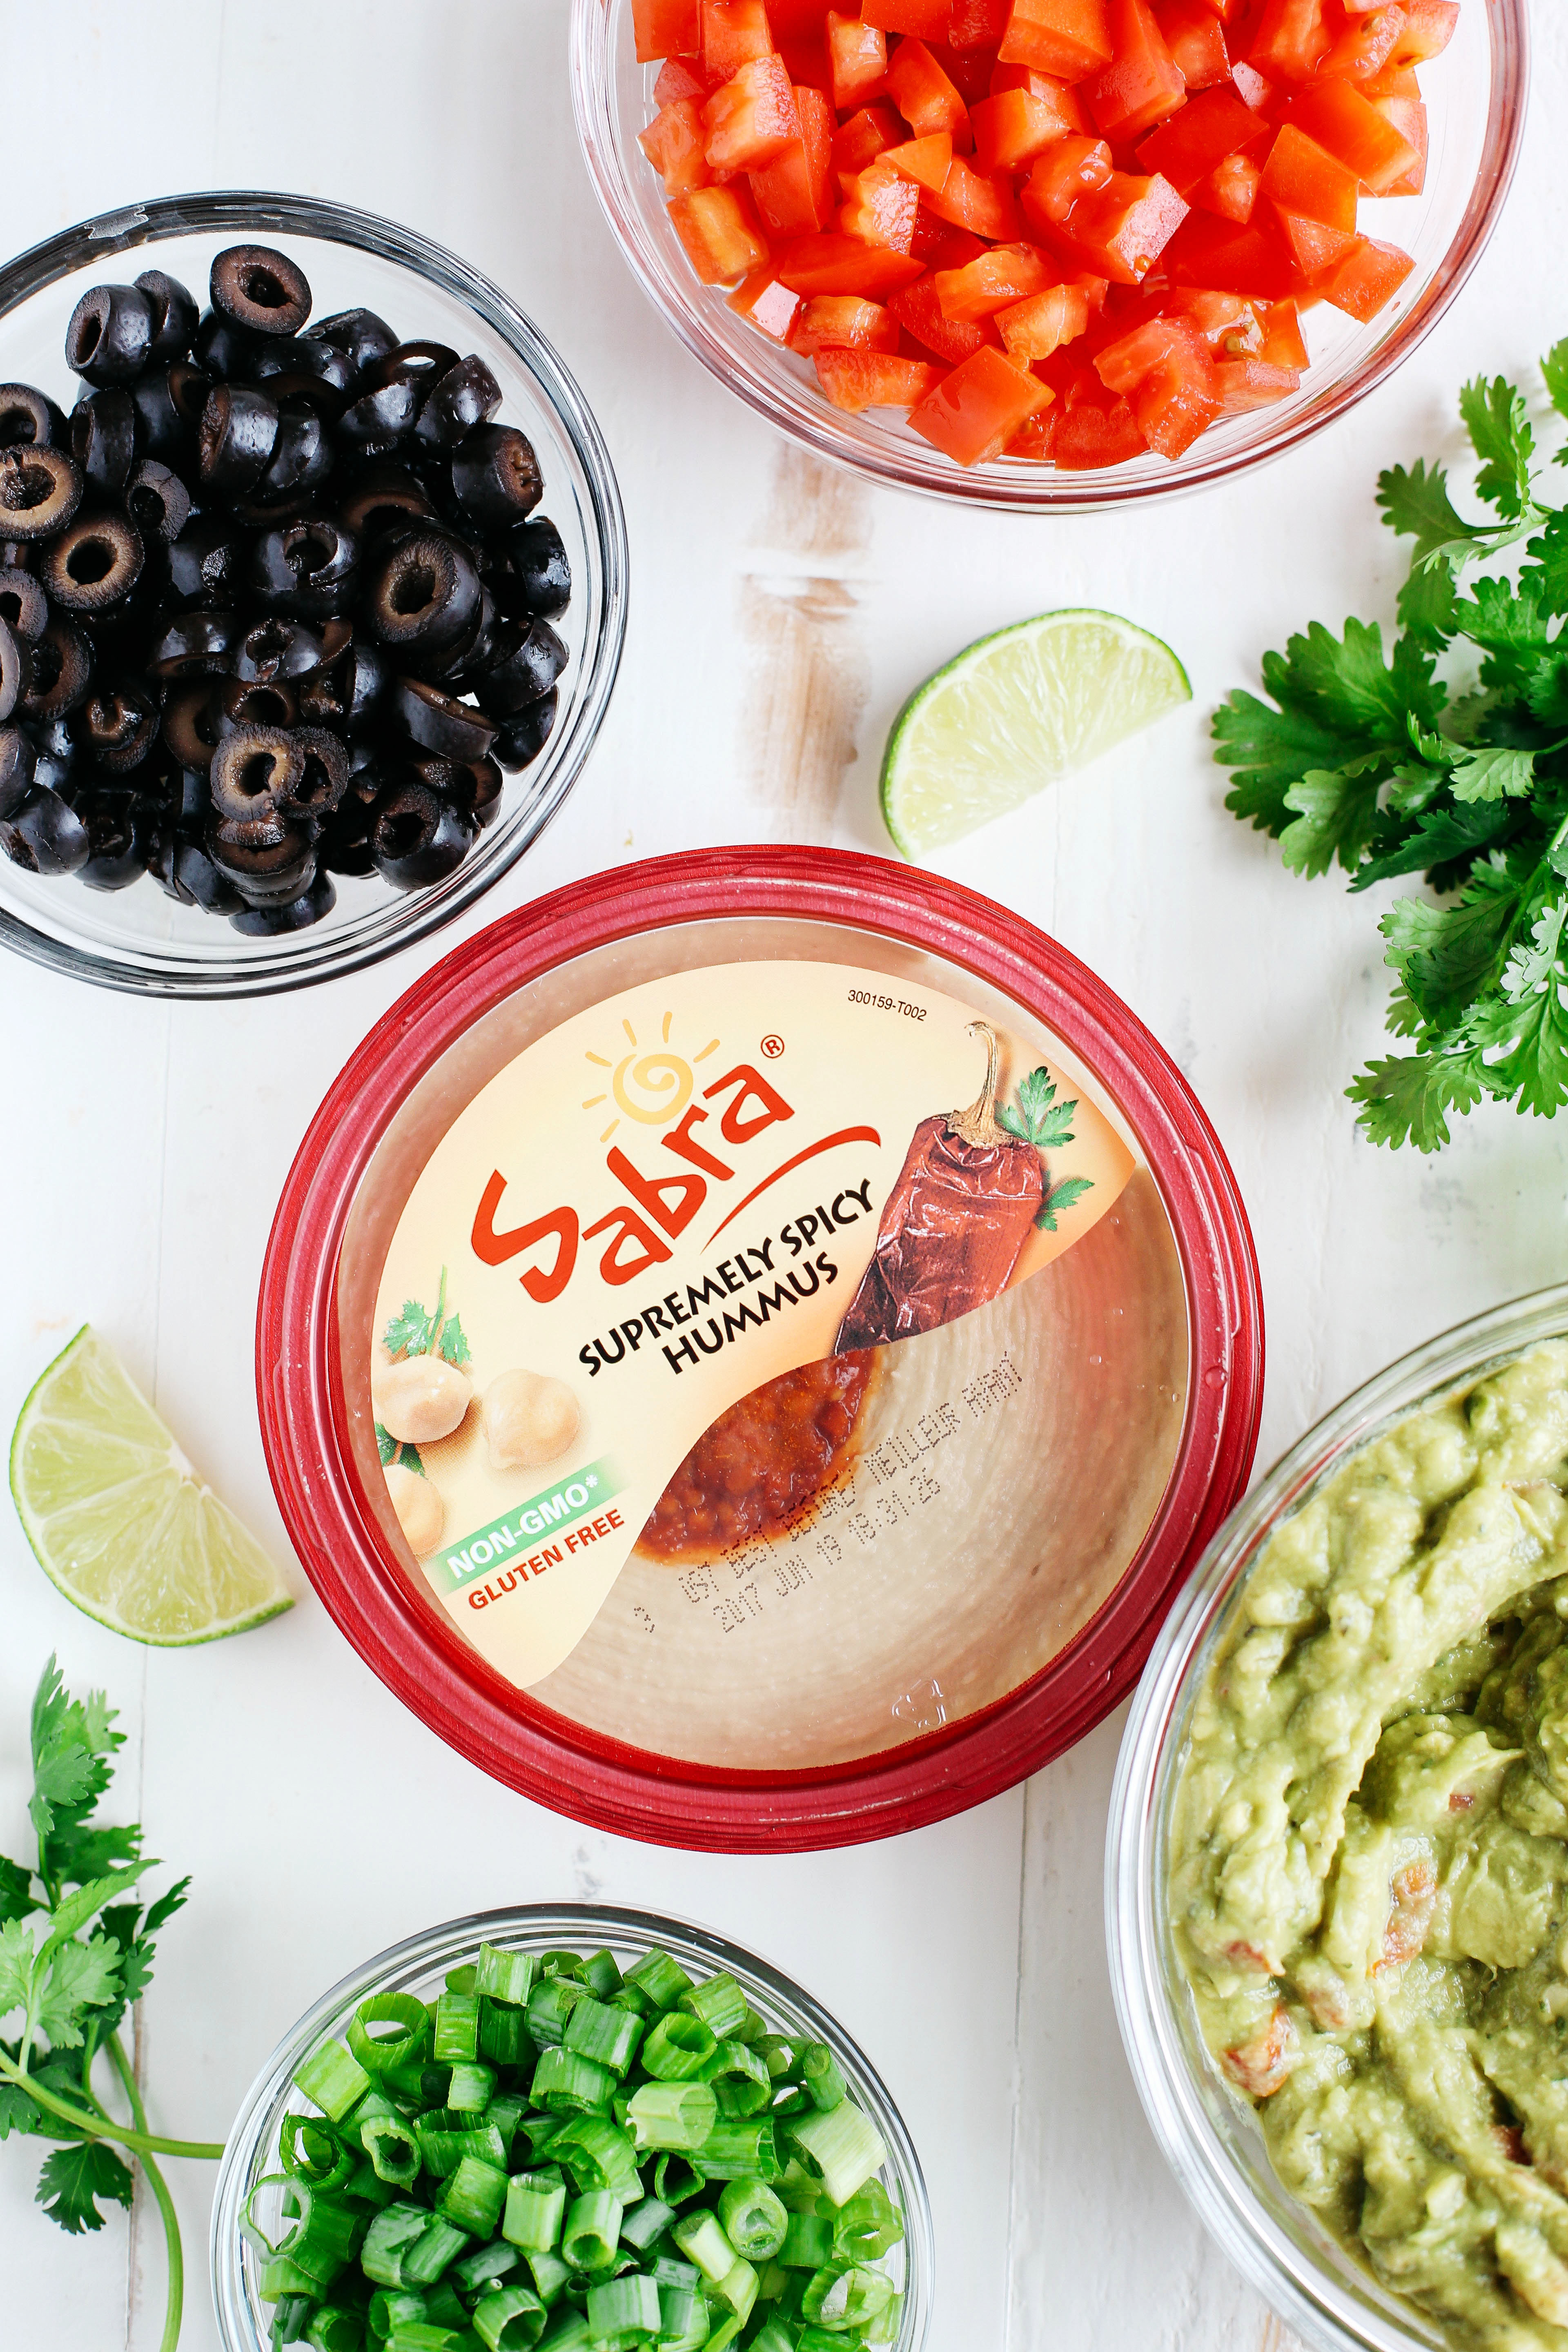 Healthier 7 Layer Spicy Taco Dip made with Greek yogurt, hummus, fresh guacamole, chunky salsa, homemade taco seasoning and all the fun toppings!  Super easy to make and always a crowdpleaser!